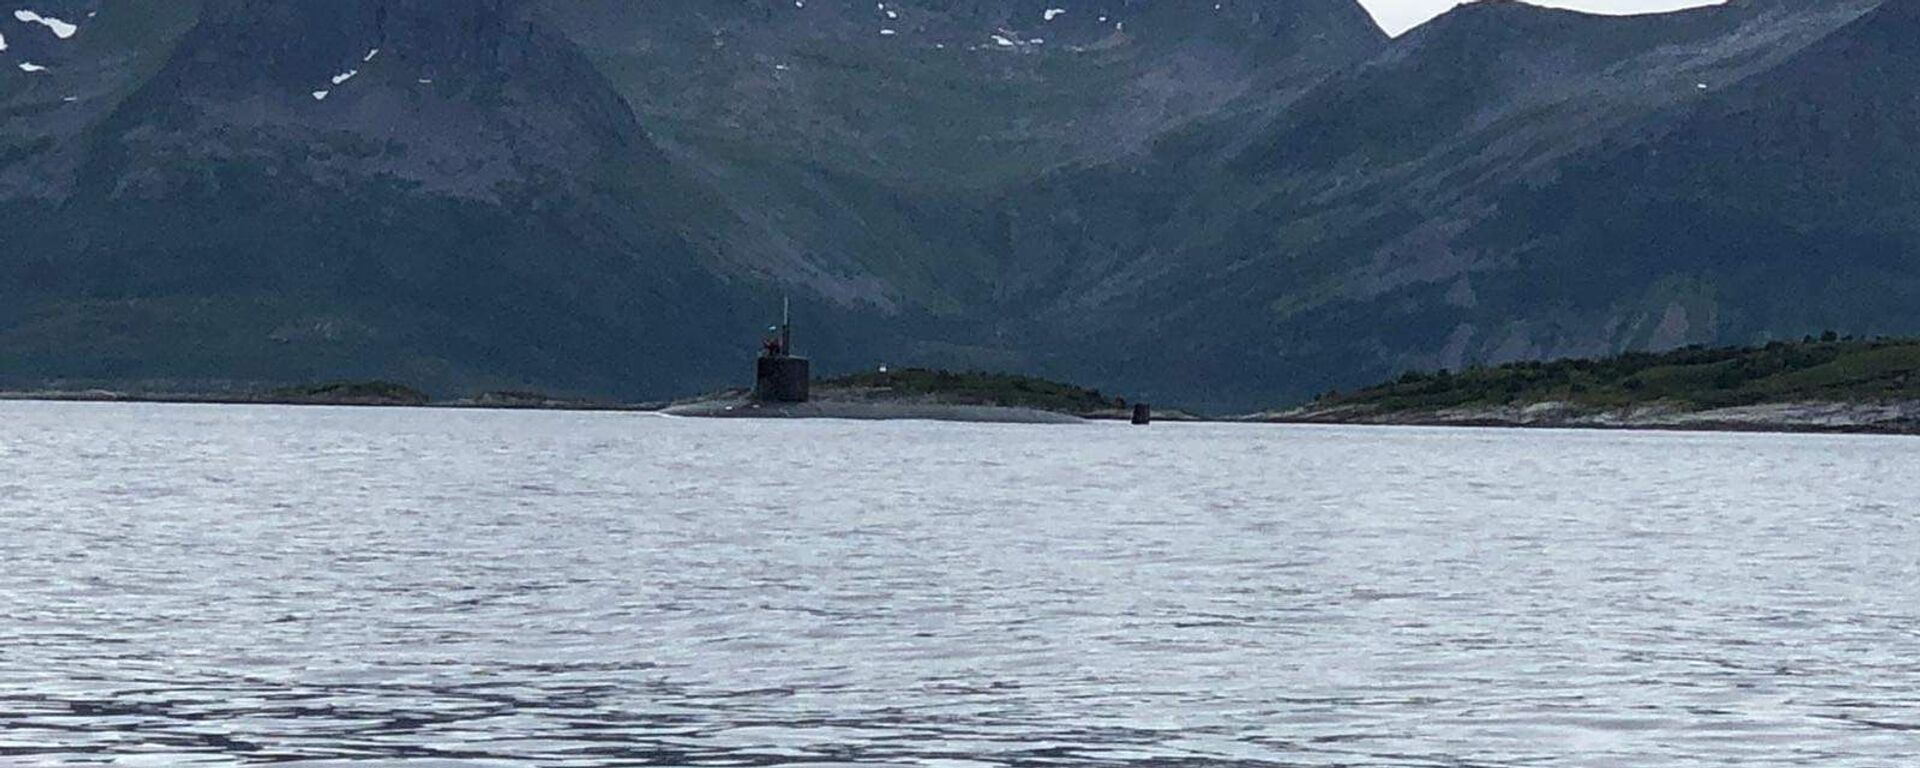 The Seawolf-class fast attack submarine USS Seawolf (SSN 21) conducts a brief stop for personnel in the Norwegian Sea off the coast of Tromso, Norway, Aug. 21, 2020. - Sputnik International, 1920, 13.05.2021